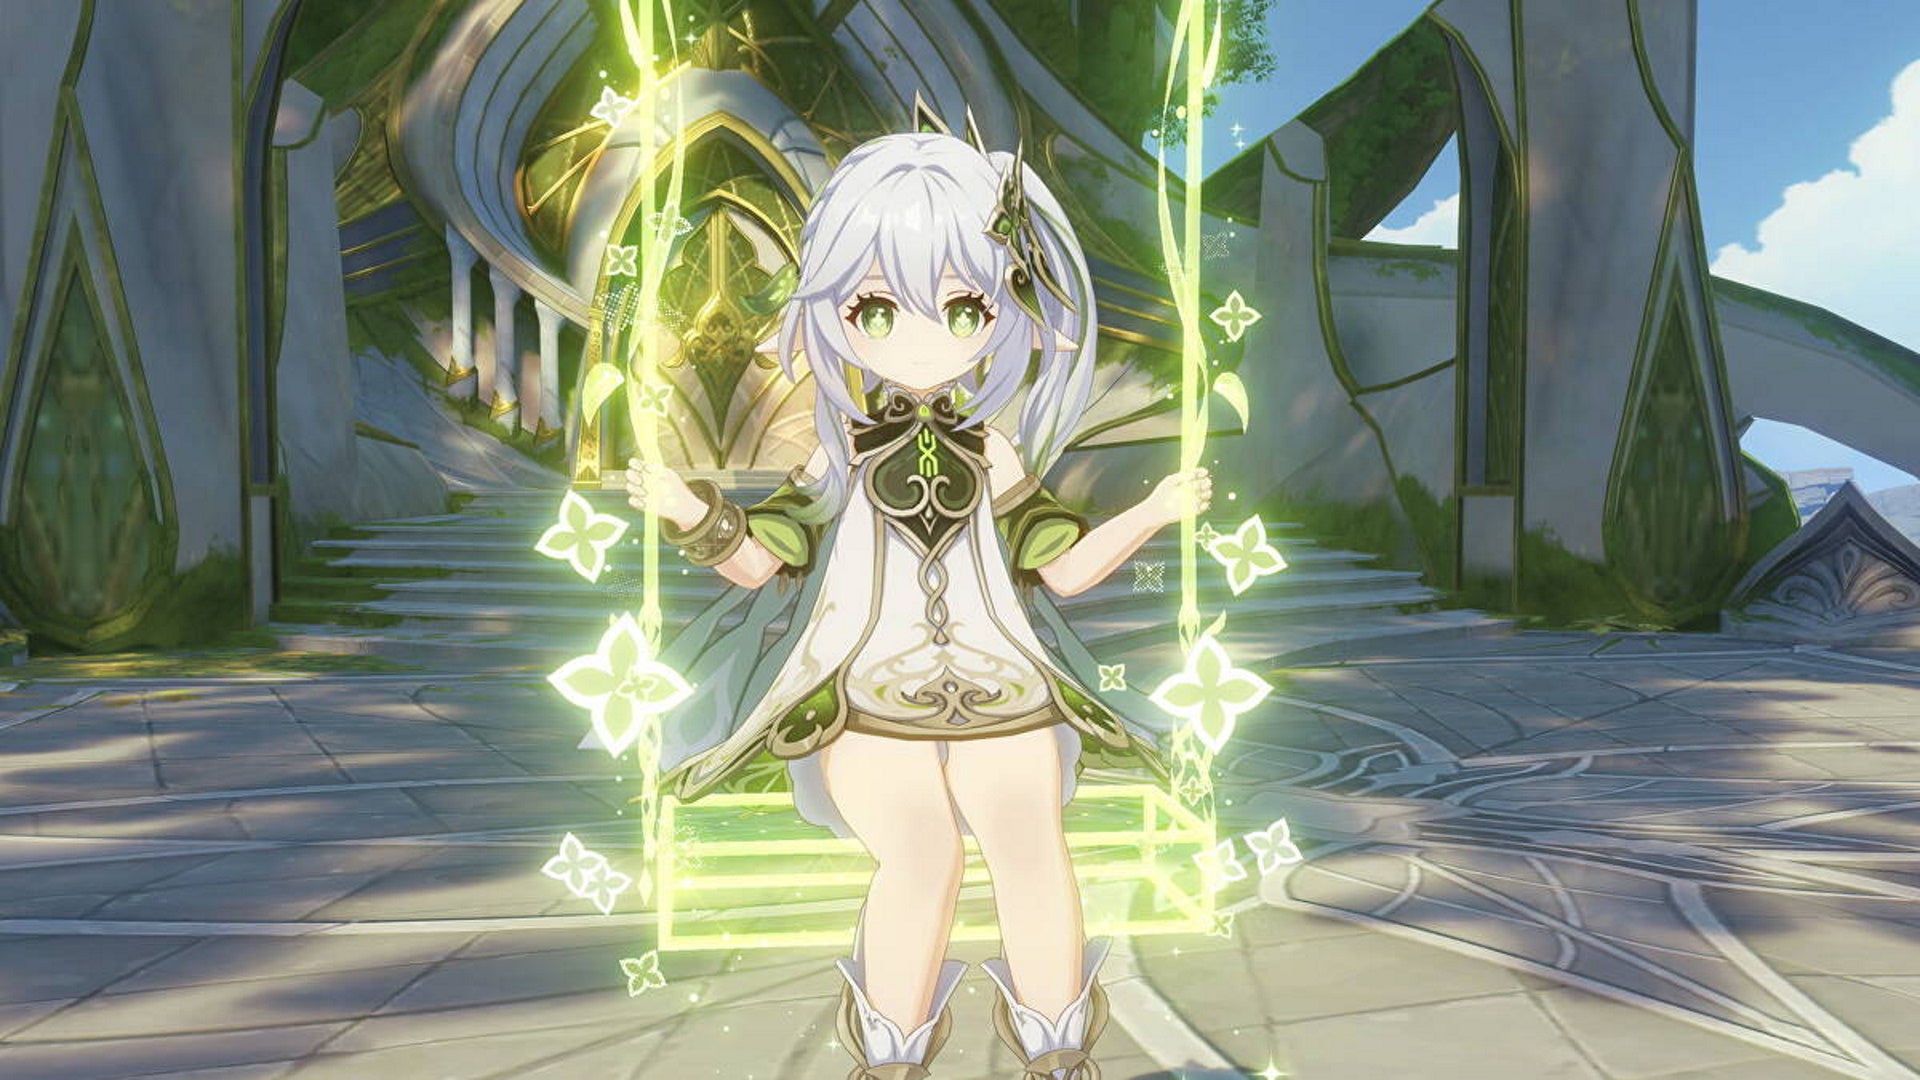 Genshin Impact Nahida teams: An anime girl in a green and silver dress is sitting on a glowing swing made of illusory vines